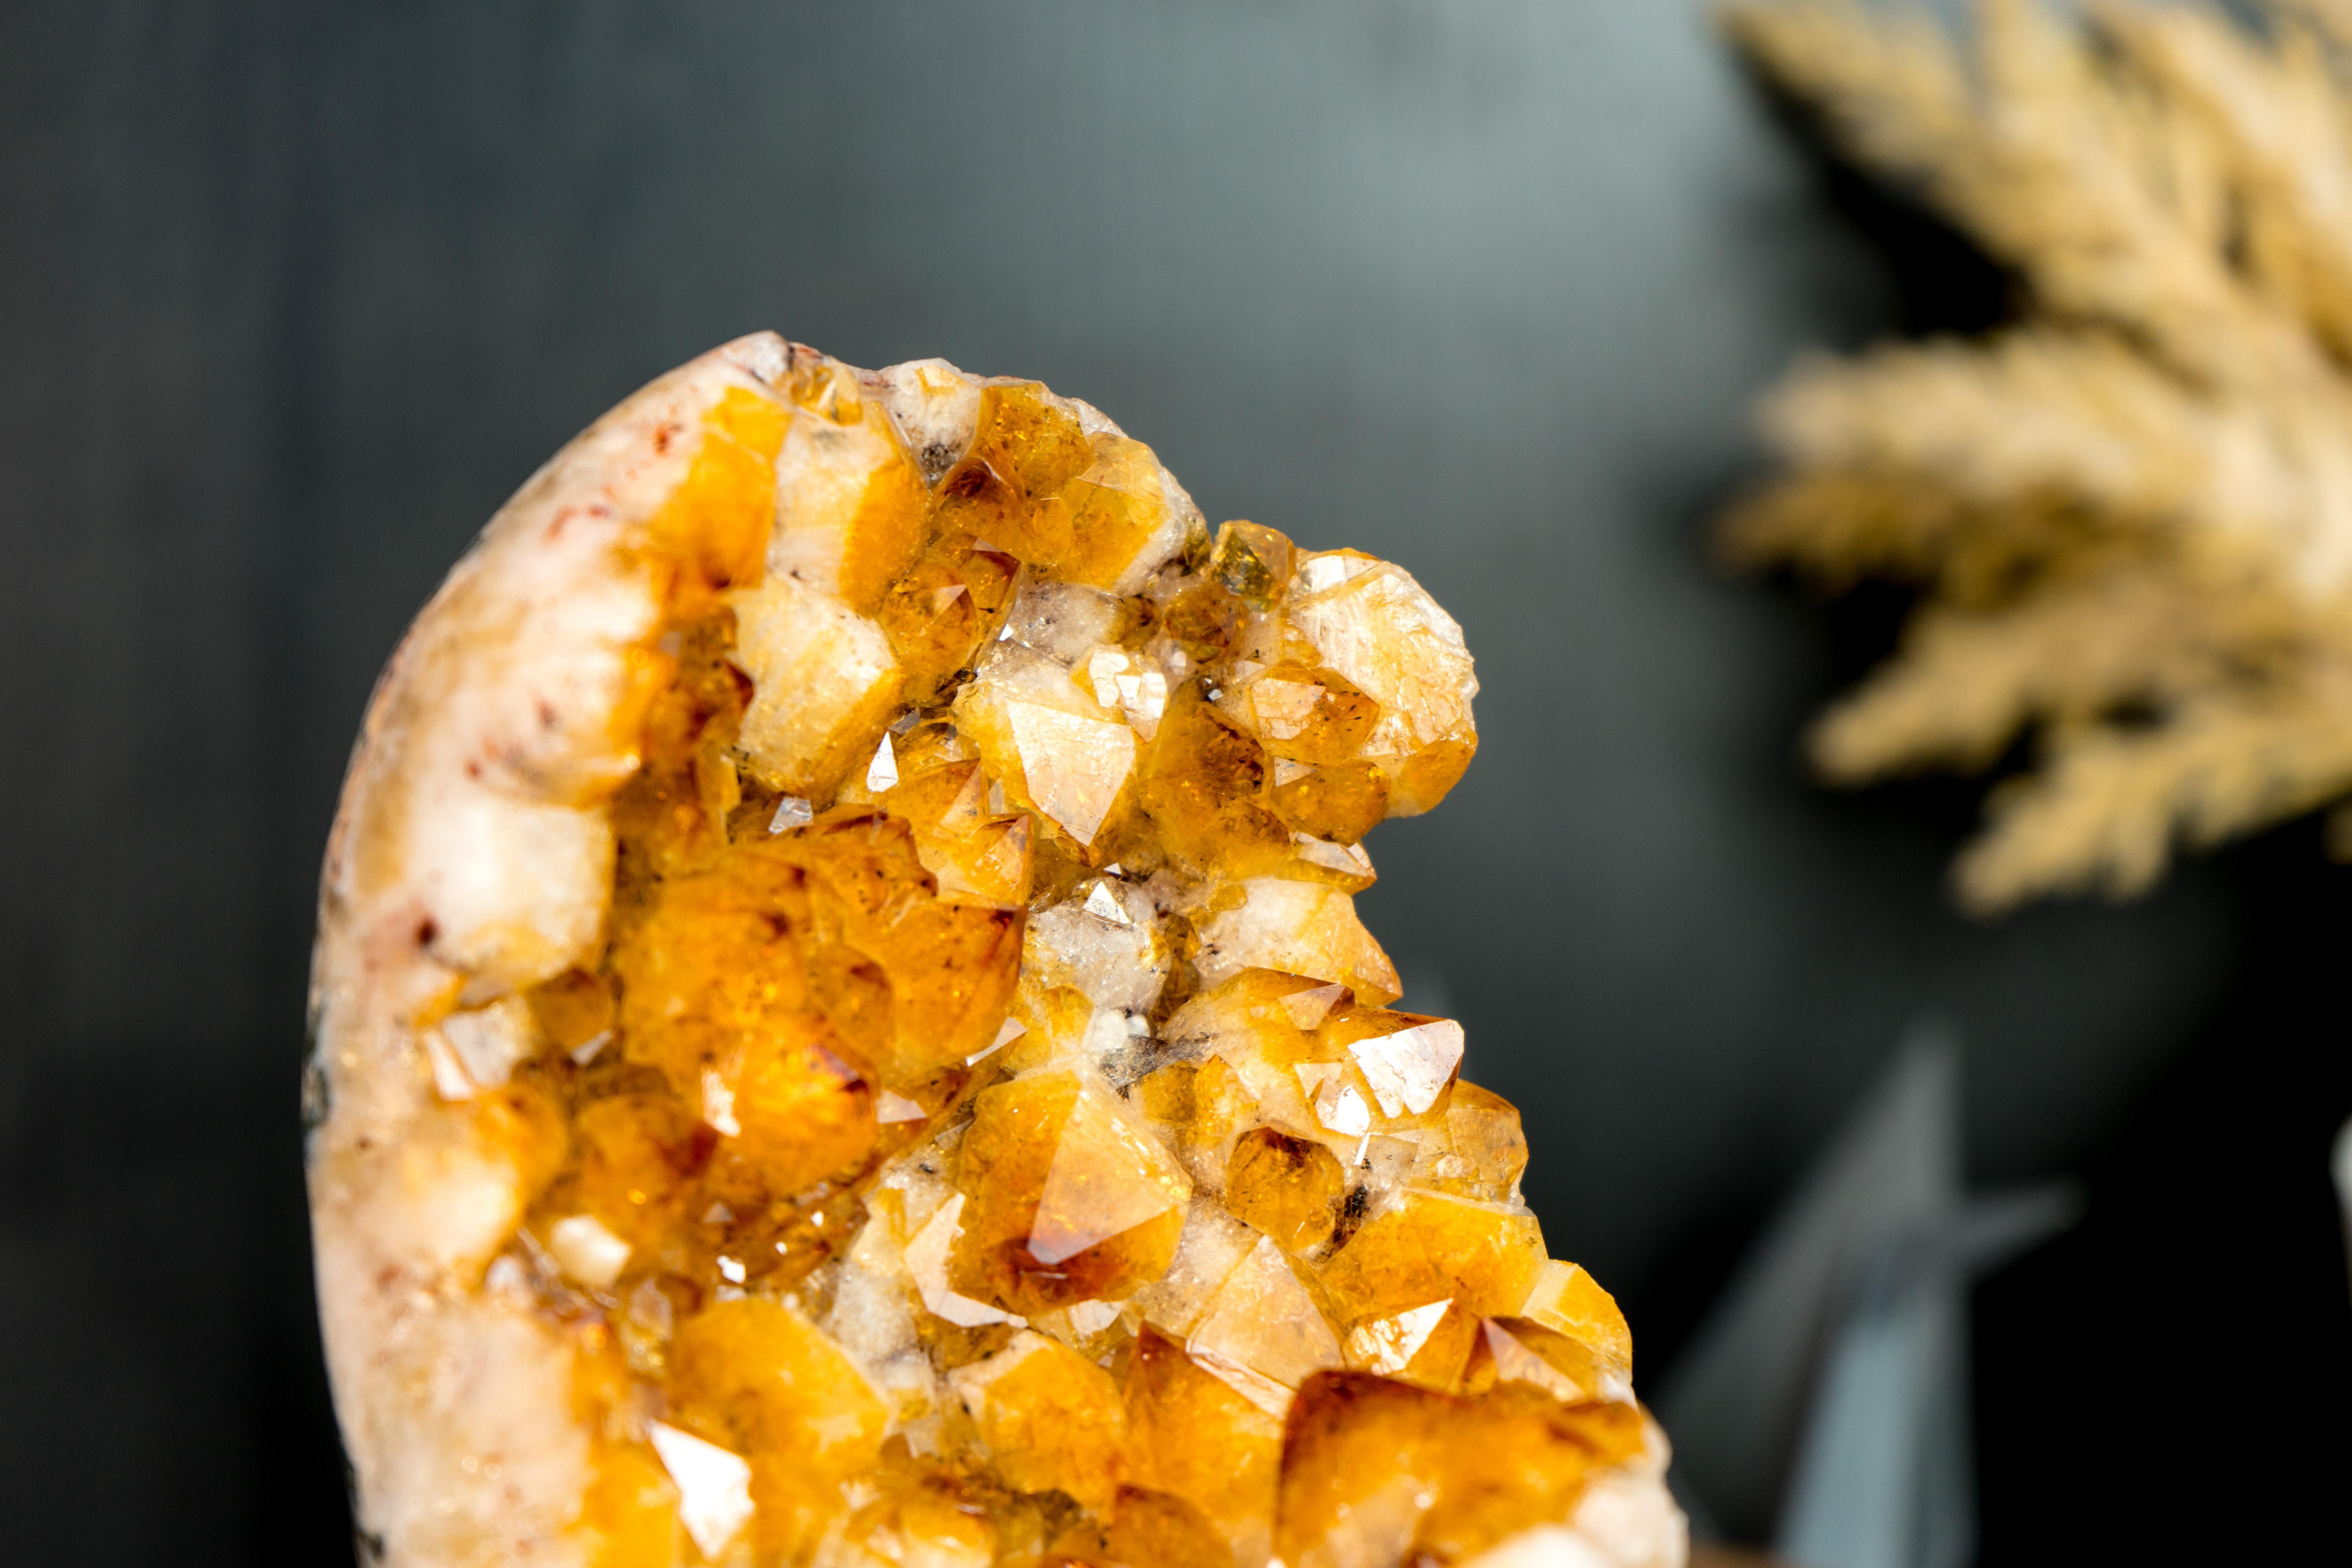 A Small, yet Gorgeous Citrine Cluster bringing an intense orange color, beautiful aesthetics that highlight the natural flower formations, and intact, perfect druzy points. With abundant energetic properties, this extraordinary citrine crystal